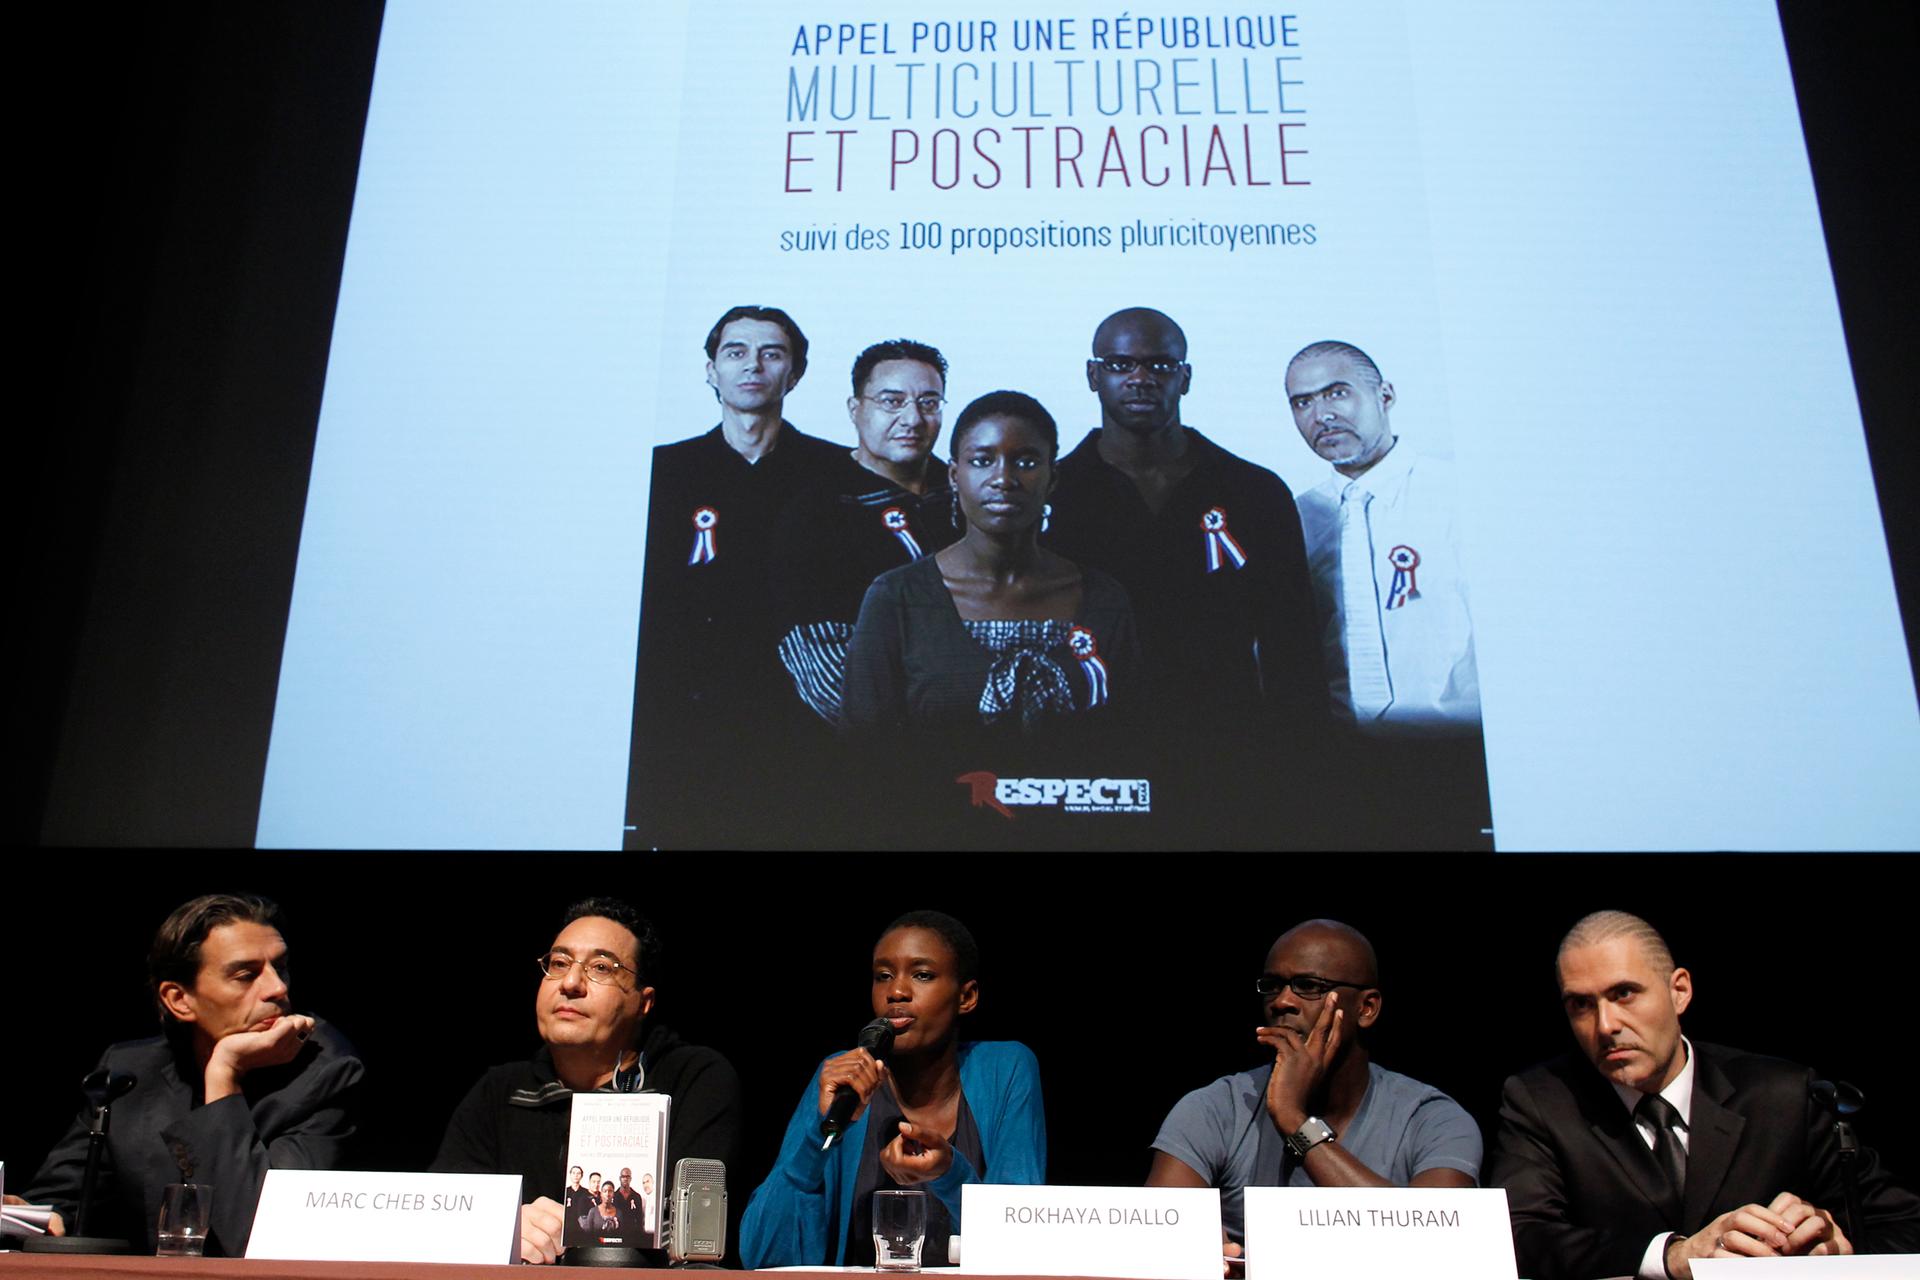 Rokhaya Diallo speaking on a panel below a screen that says in French, 'call for a multicultural and postracial republic' 